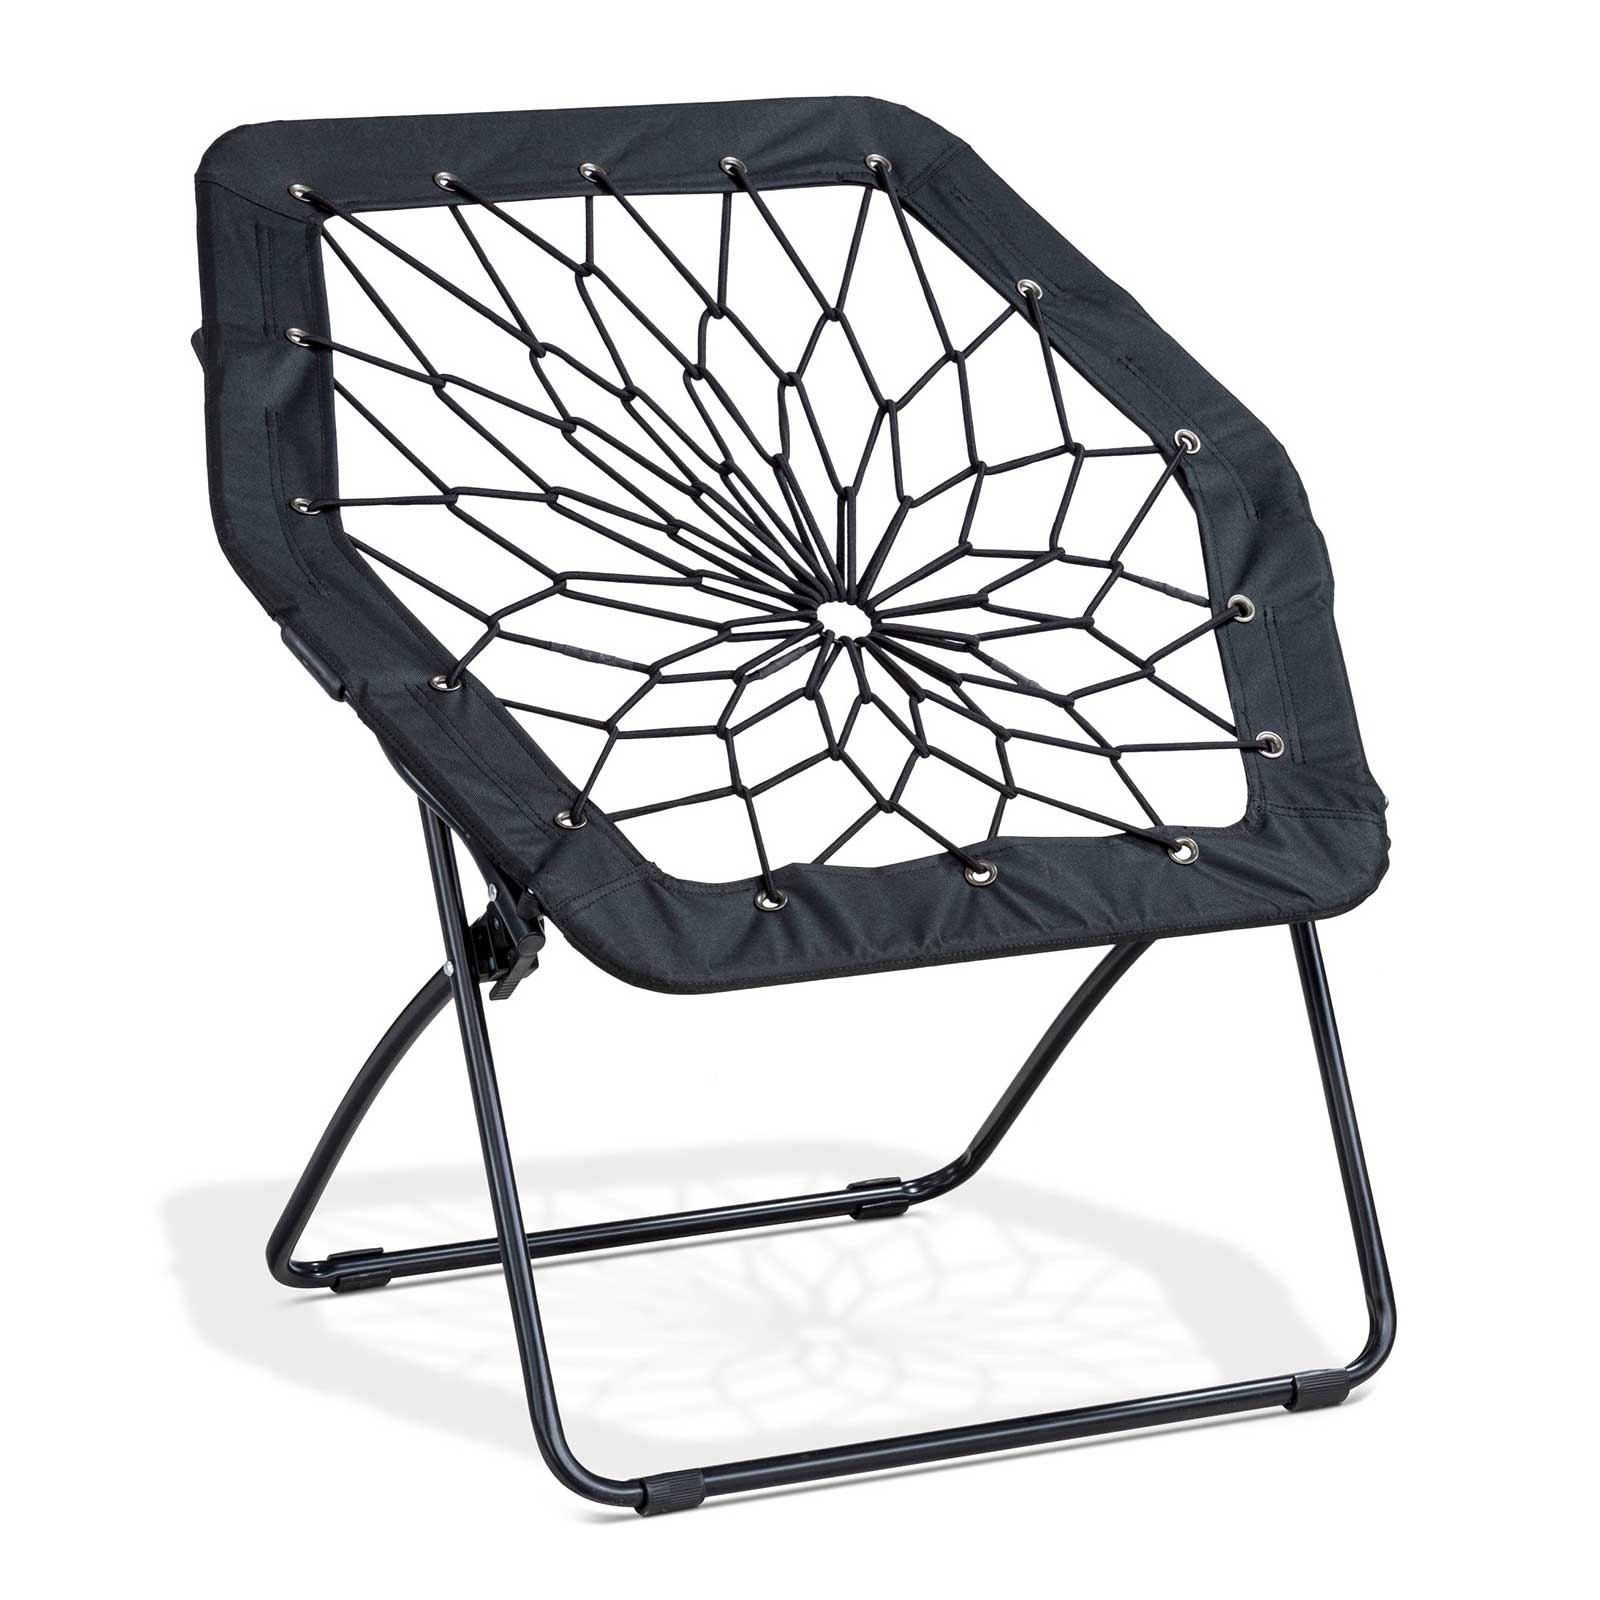 Euro Style Bungee Chair The Best Green Euro Style Bungee